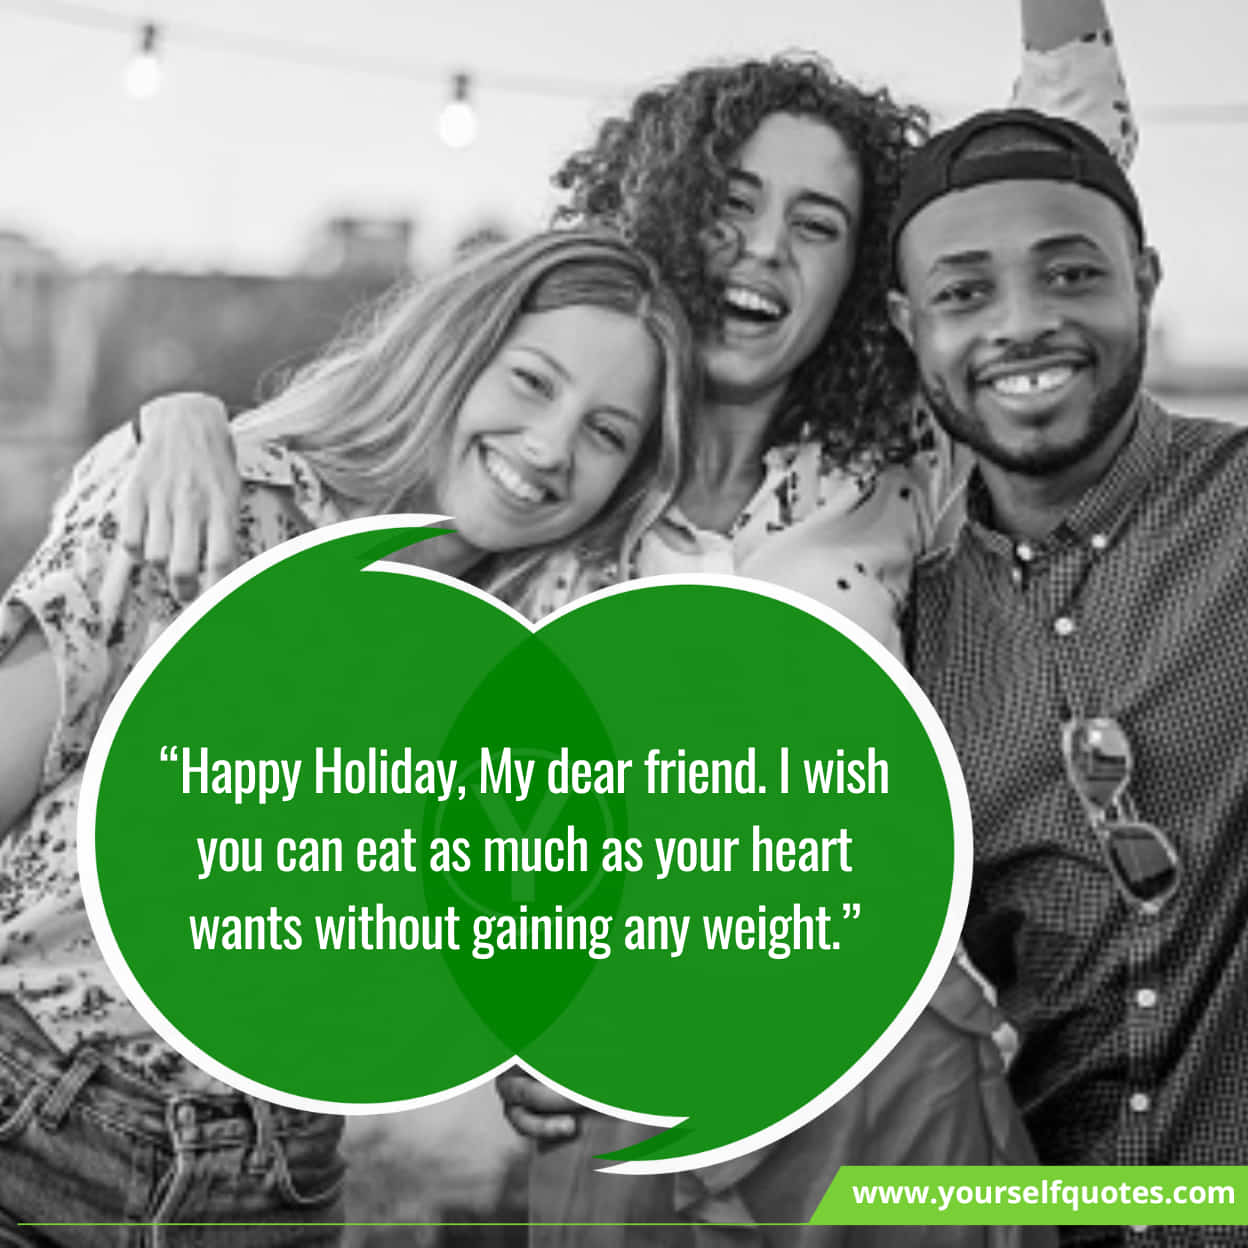 Inspiring Holiday Wishes For Friends